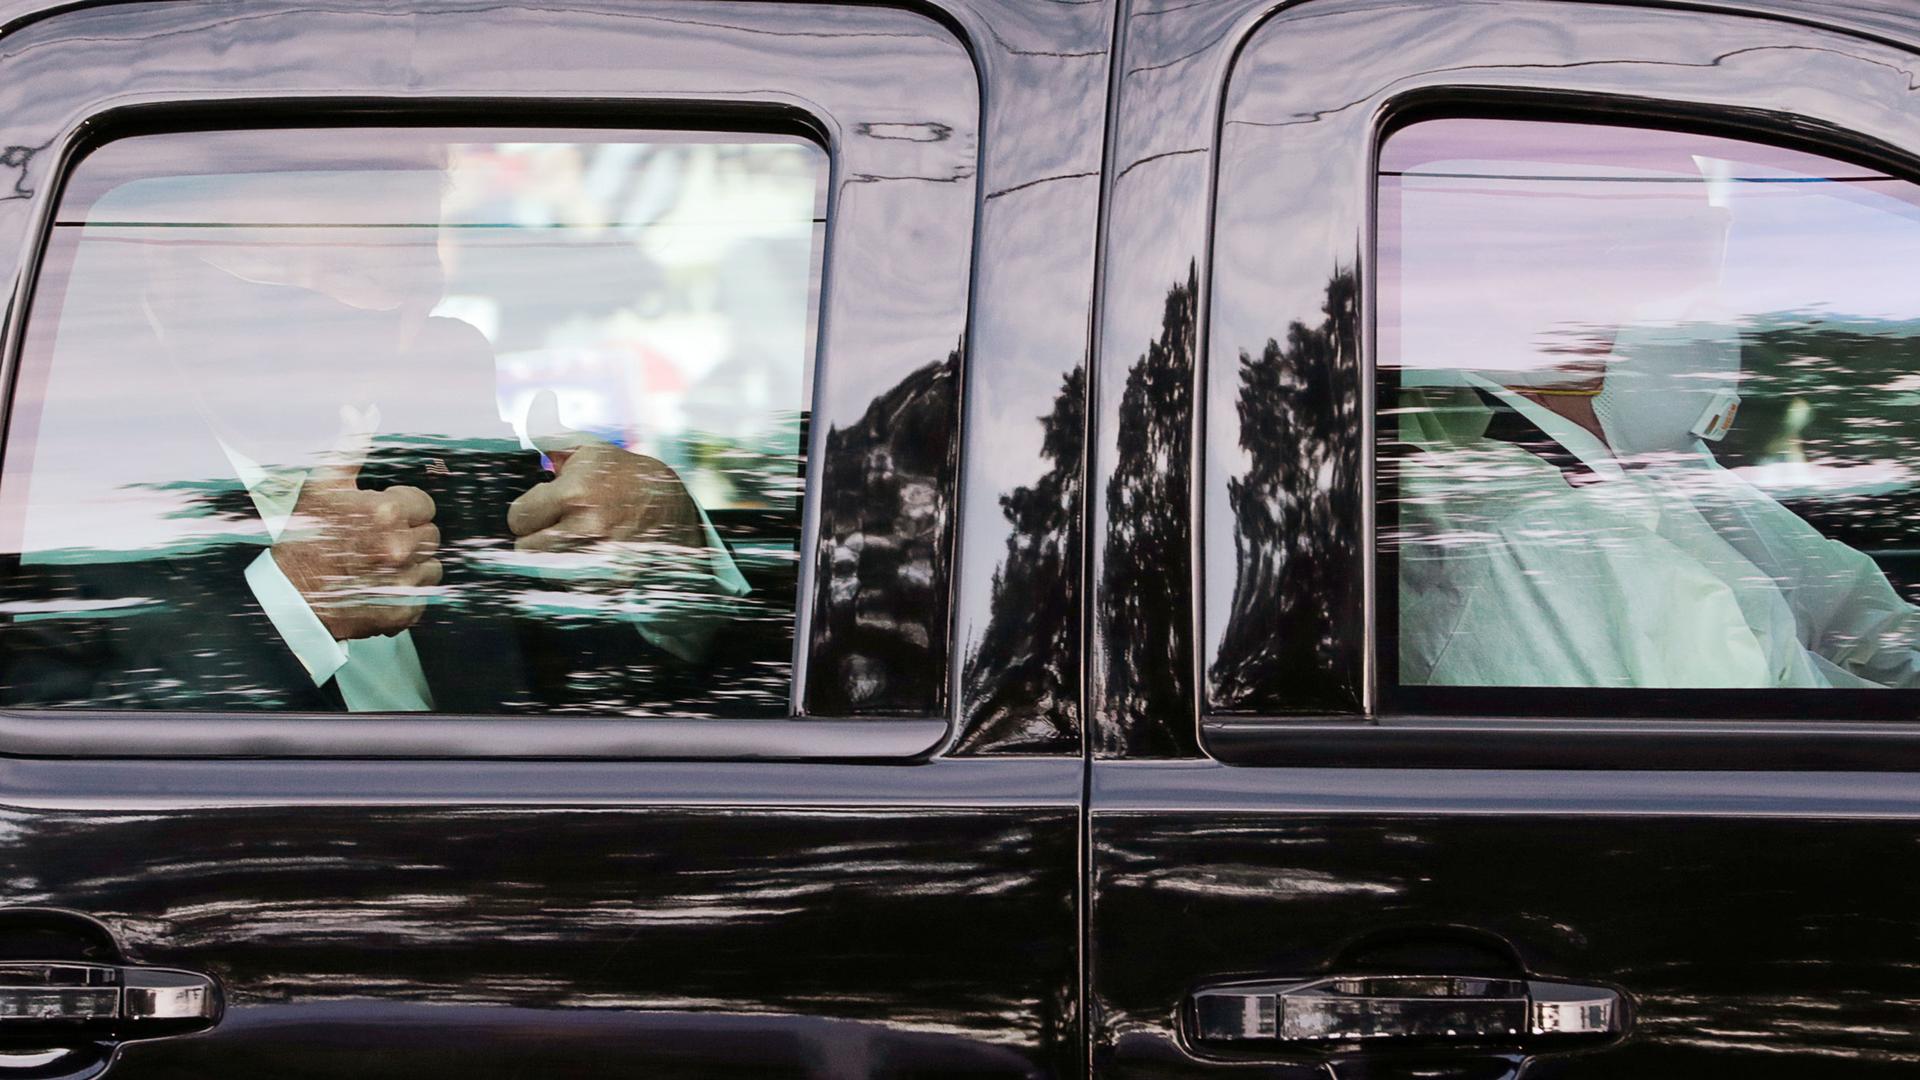 US President Donald Trump is shown through the glass of black SUV giving the thumbs up sign with both of his hands while wearing a face mask.